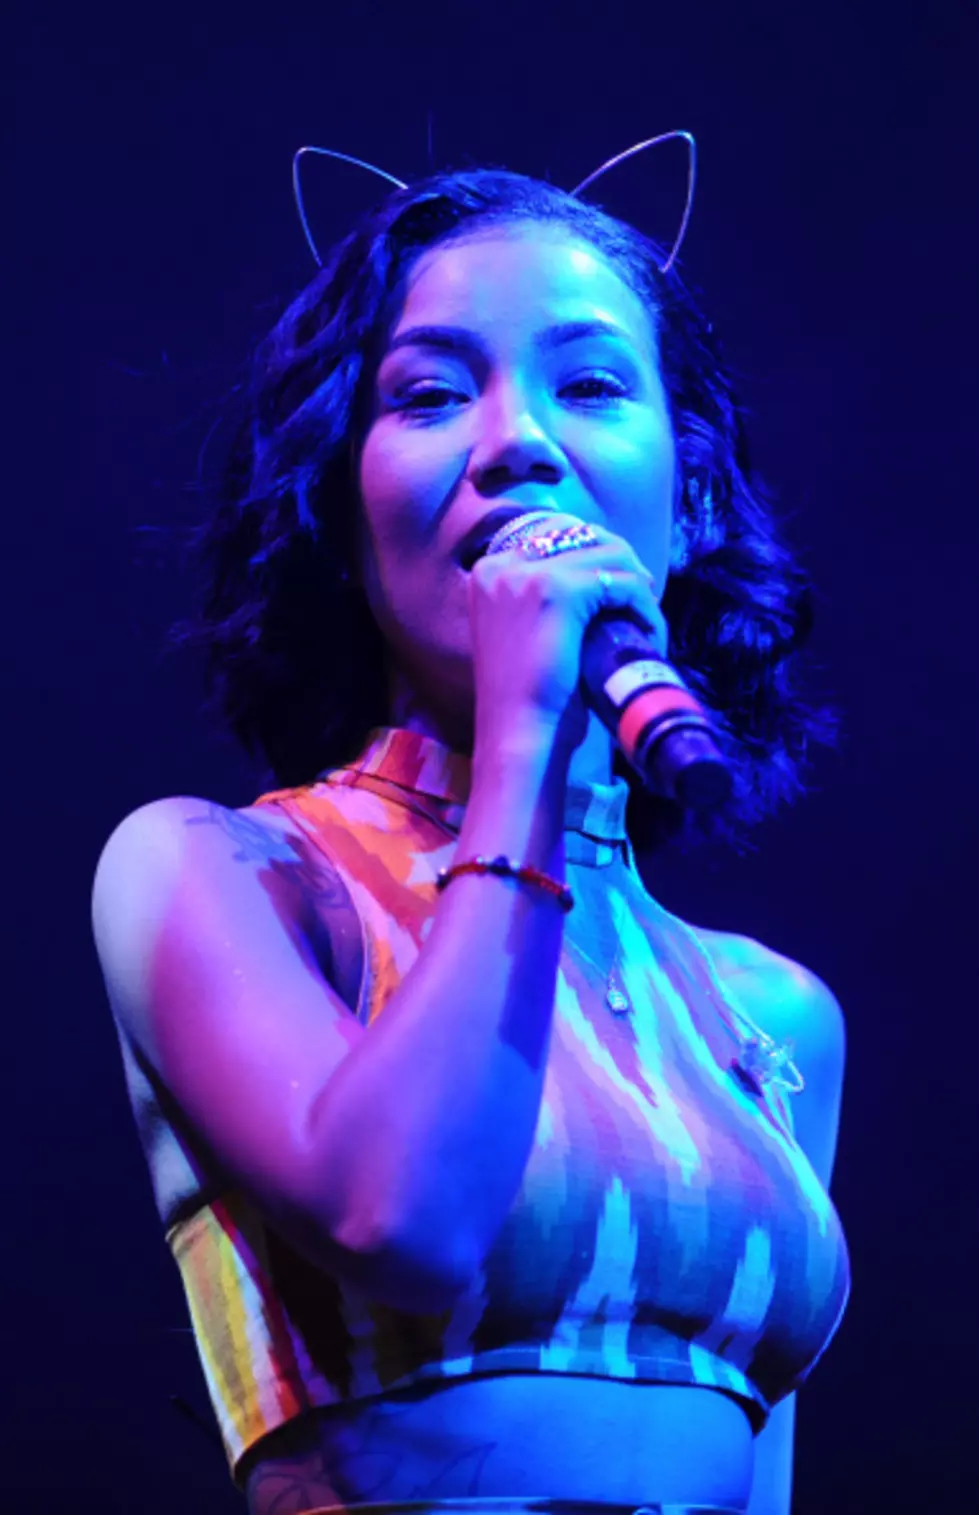 Jhene Aiko “Souled Out” Full Album Stream, Listen Here! HOT After Dark with Linda Love